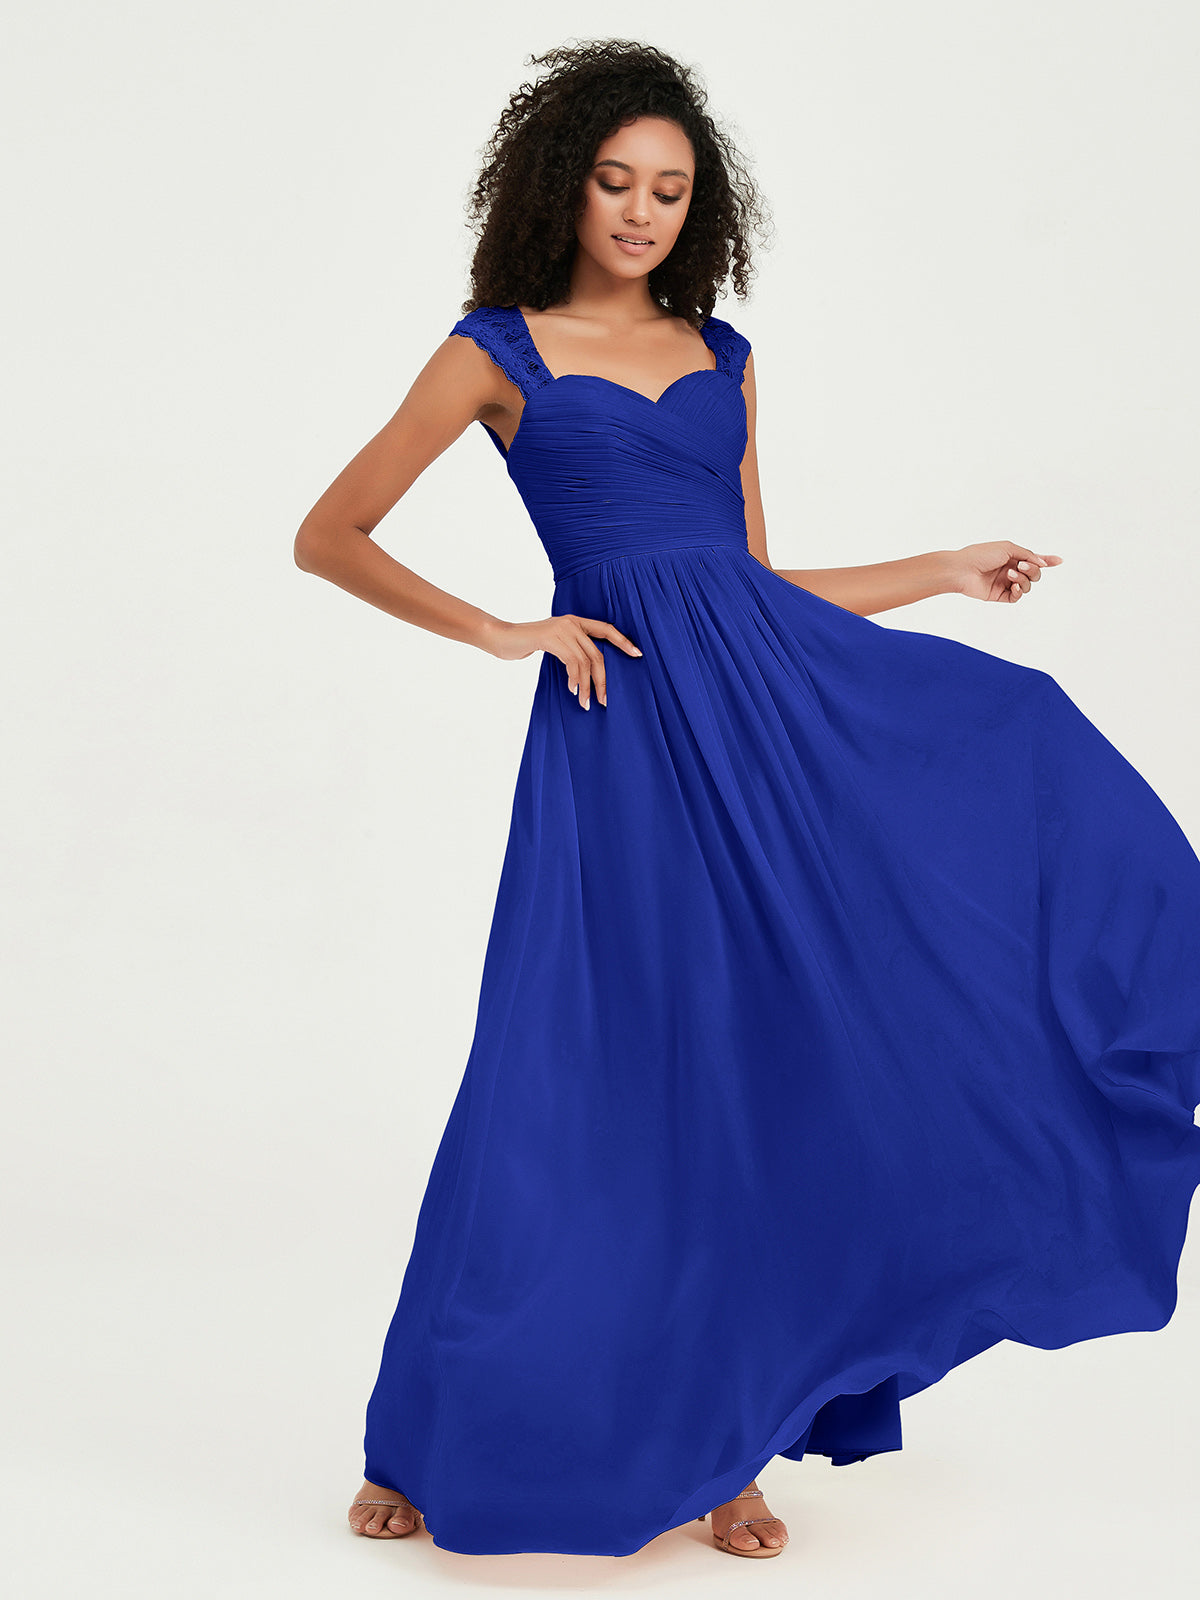 Sweetheart Chiffon Dresses with Lace Cap Sleeves Royal Blue